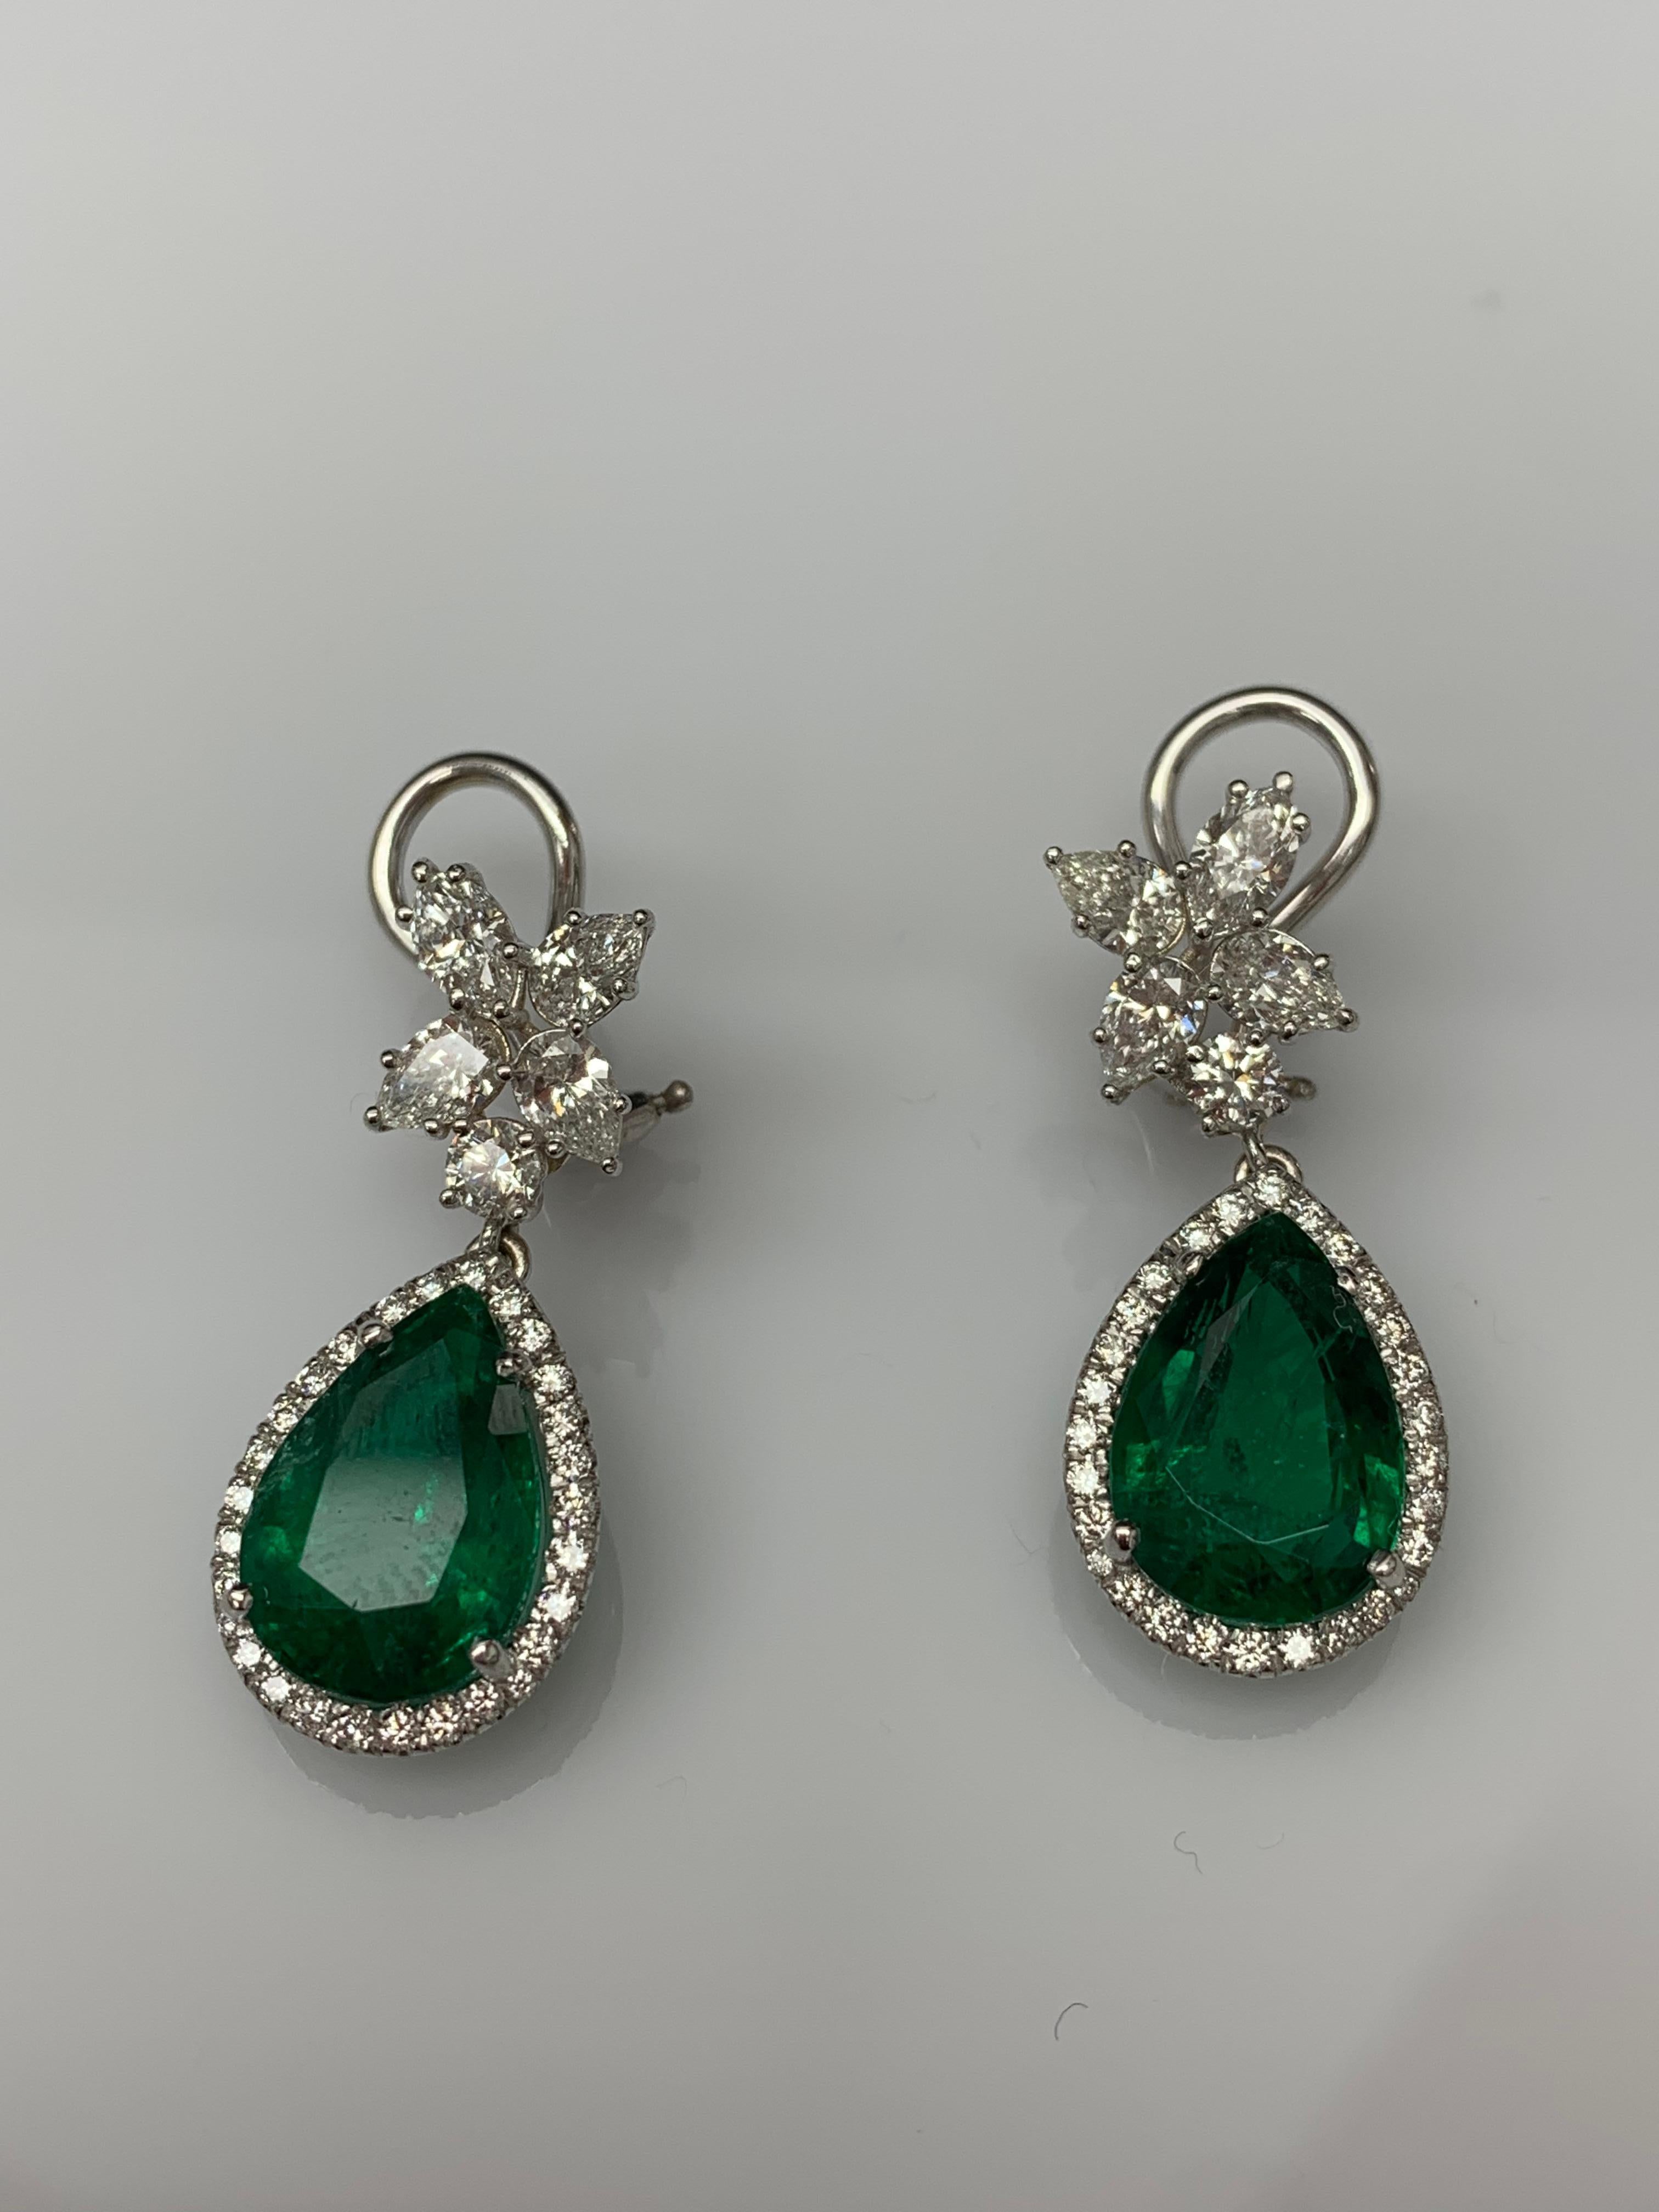 8.92 Carat of Pear Shape Emerald and Diamond Drop Earrings in 18K White Gold For Sale 10